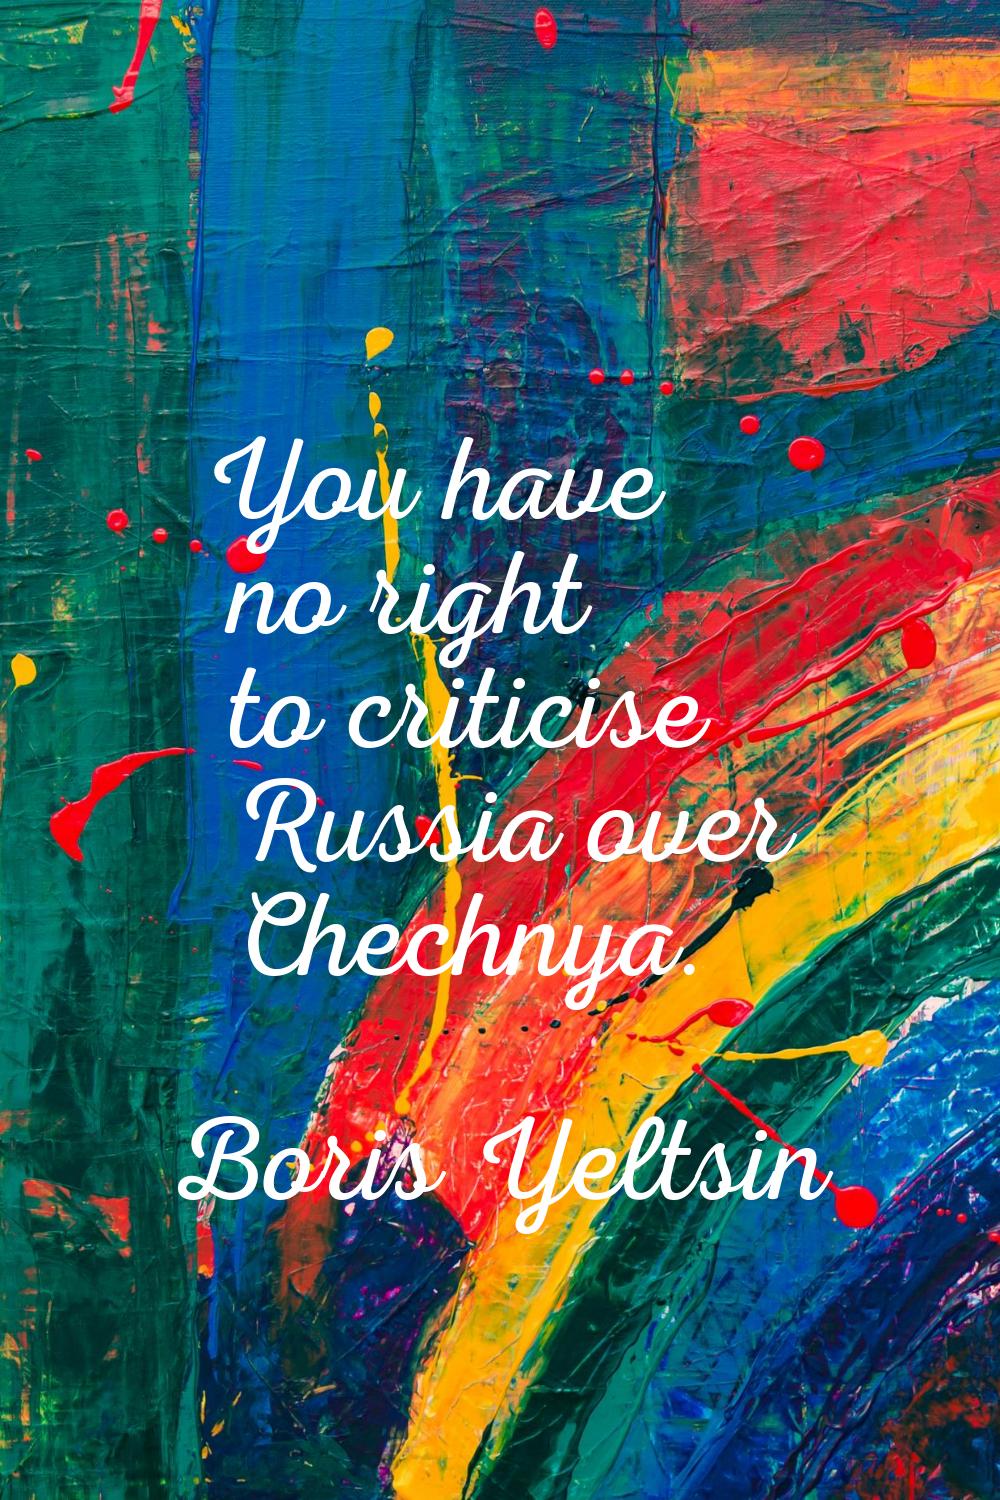 You have no right to criticise Russia over Chechnya.